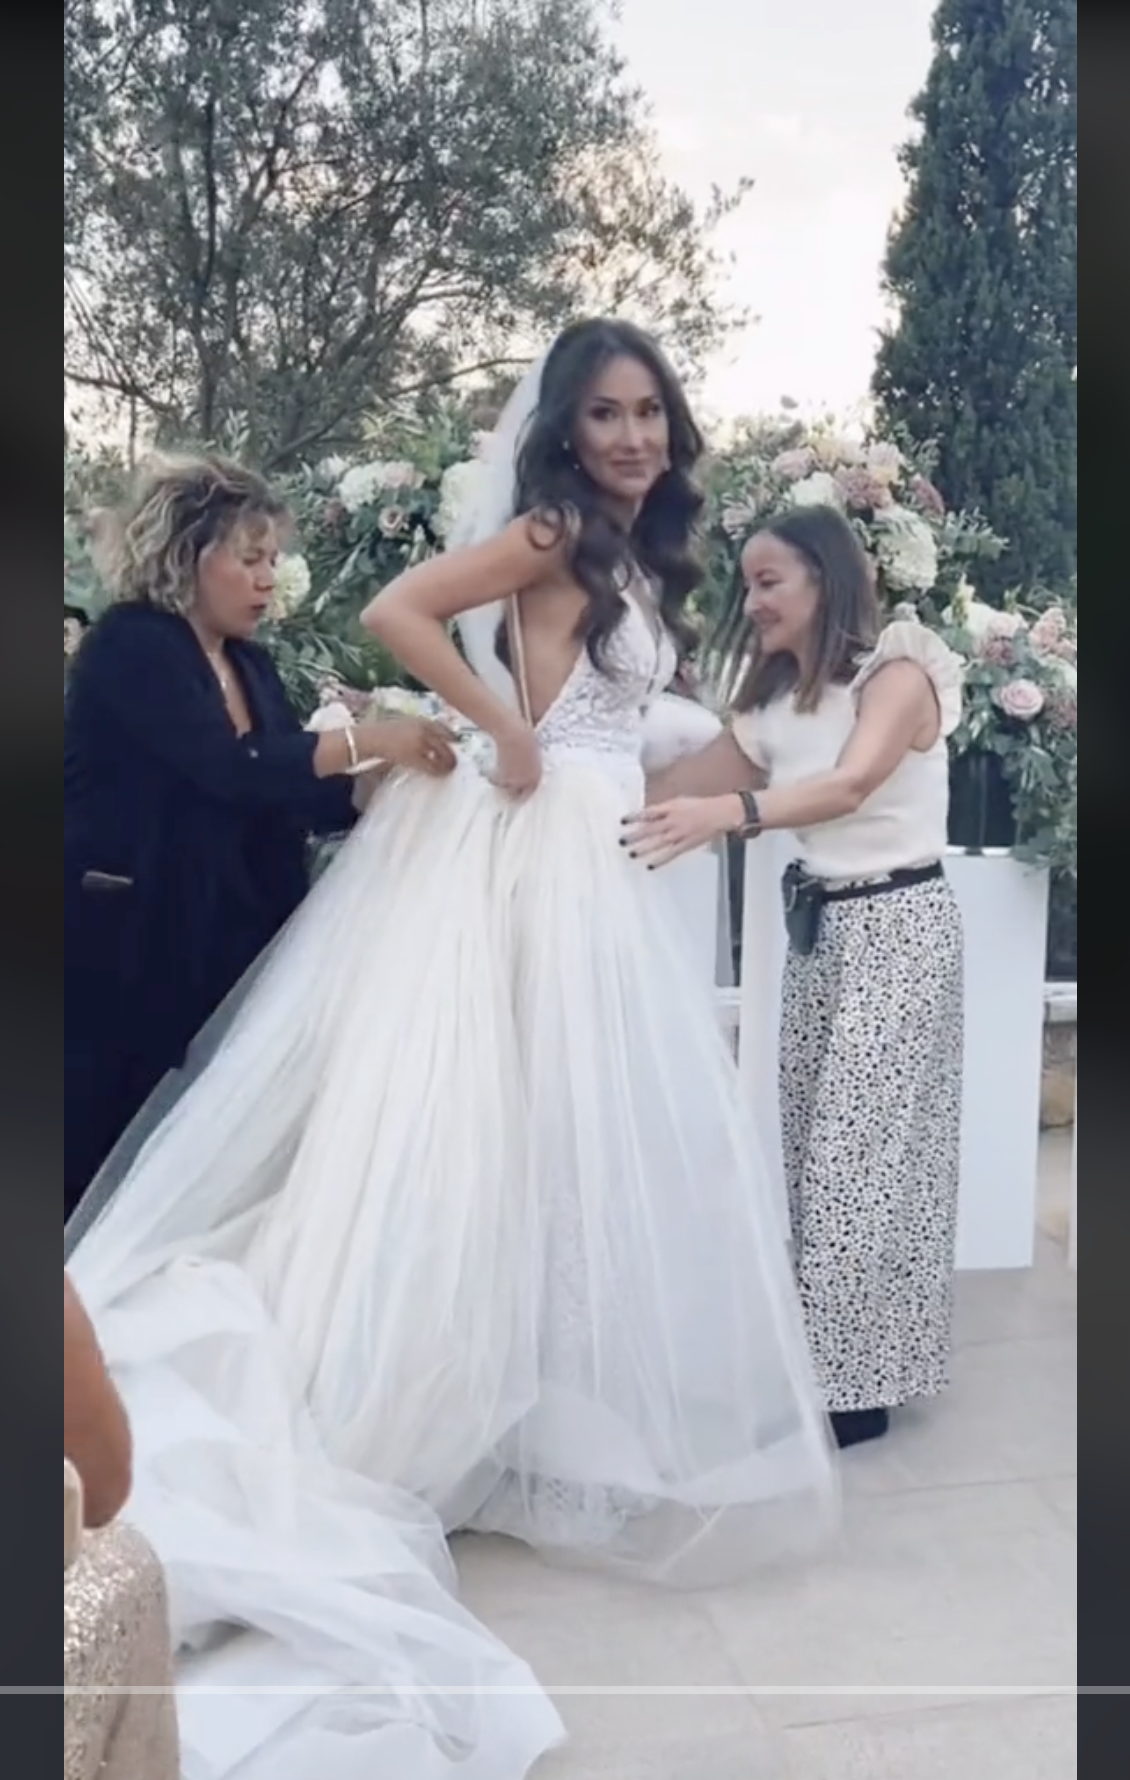 Becky Jefferies putting on her bridal gown's skirt and train, as seen in a video dated May 5, 2022 | Source: tiktok.com/@jetsetbecks